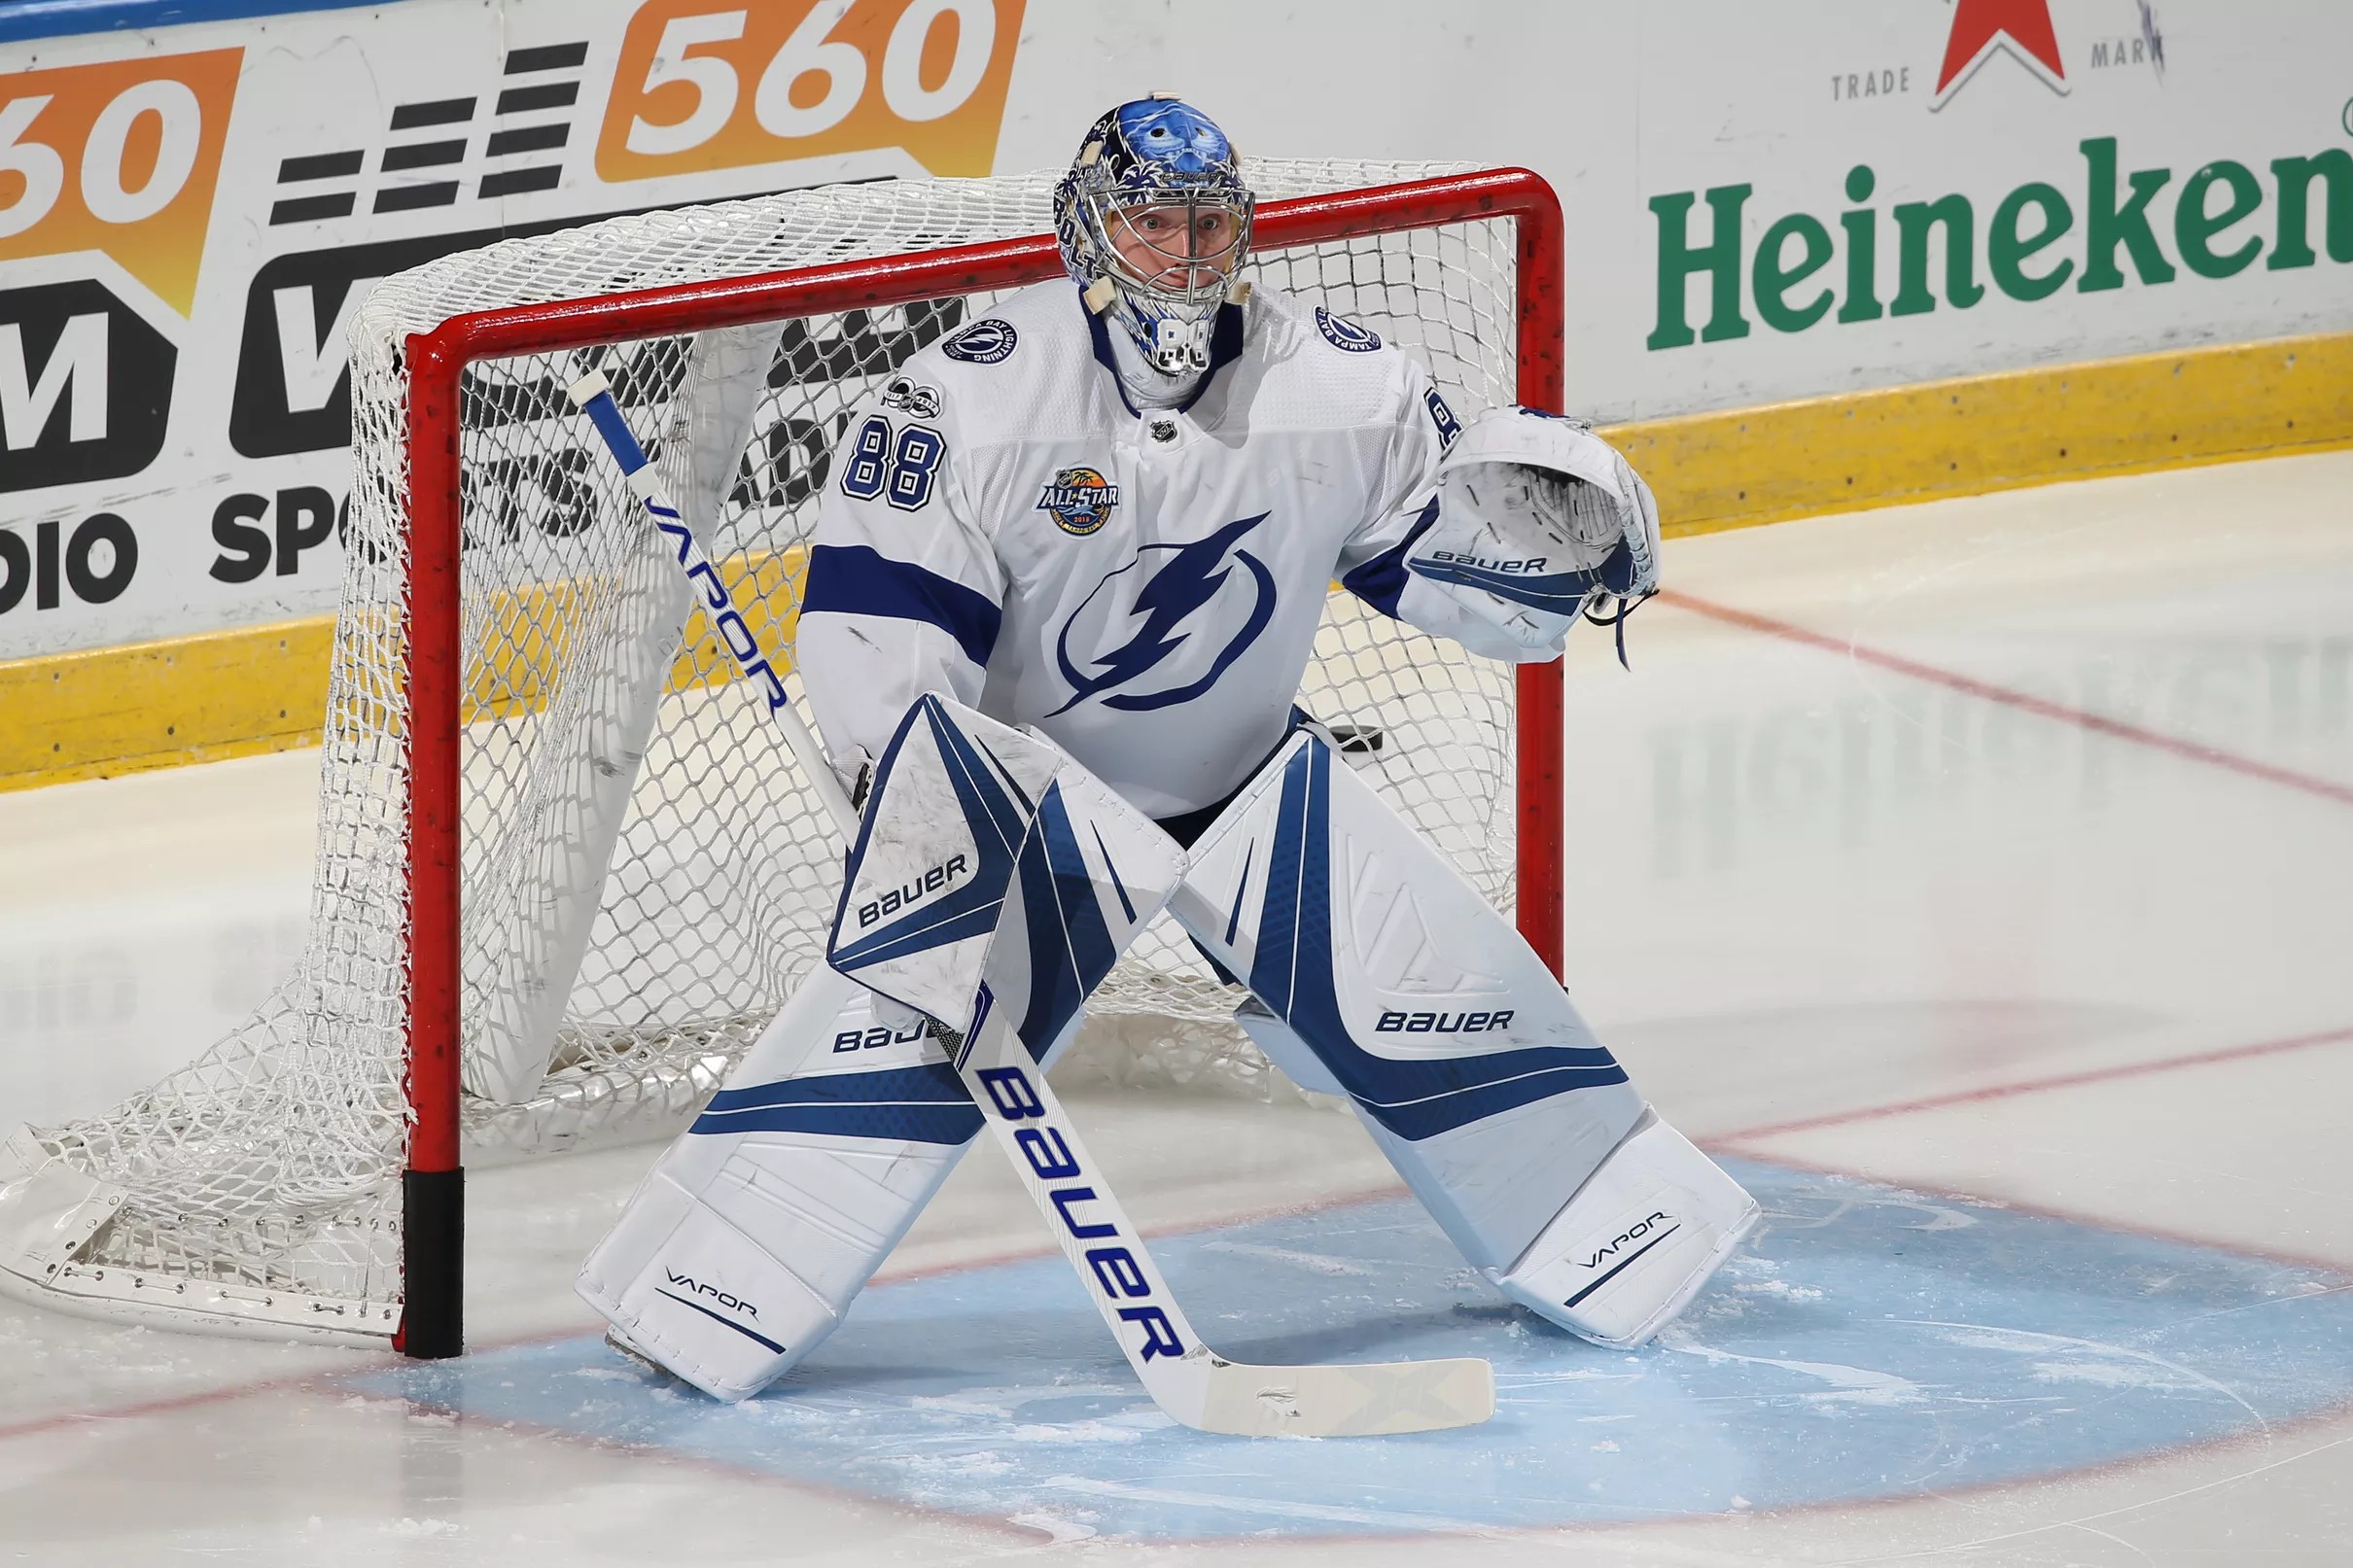 Quick Strikes Andrei Vasilevskiy continues to shine for the Tampa Bay